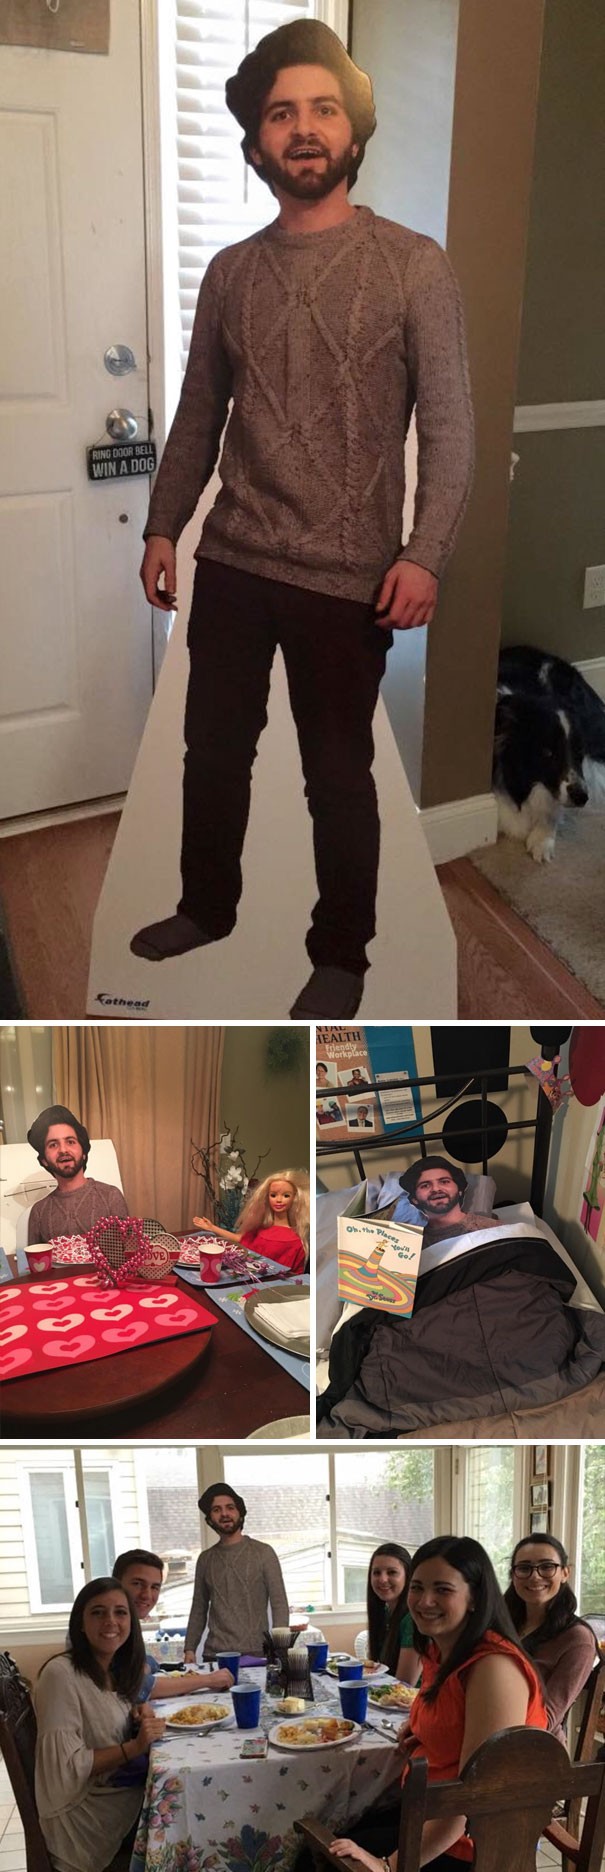 Her son has left for college so, with this life-size cardboard cutout of him, is how she will await his return to the family!